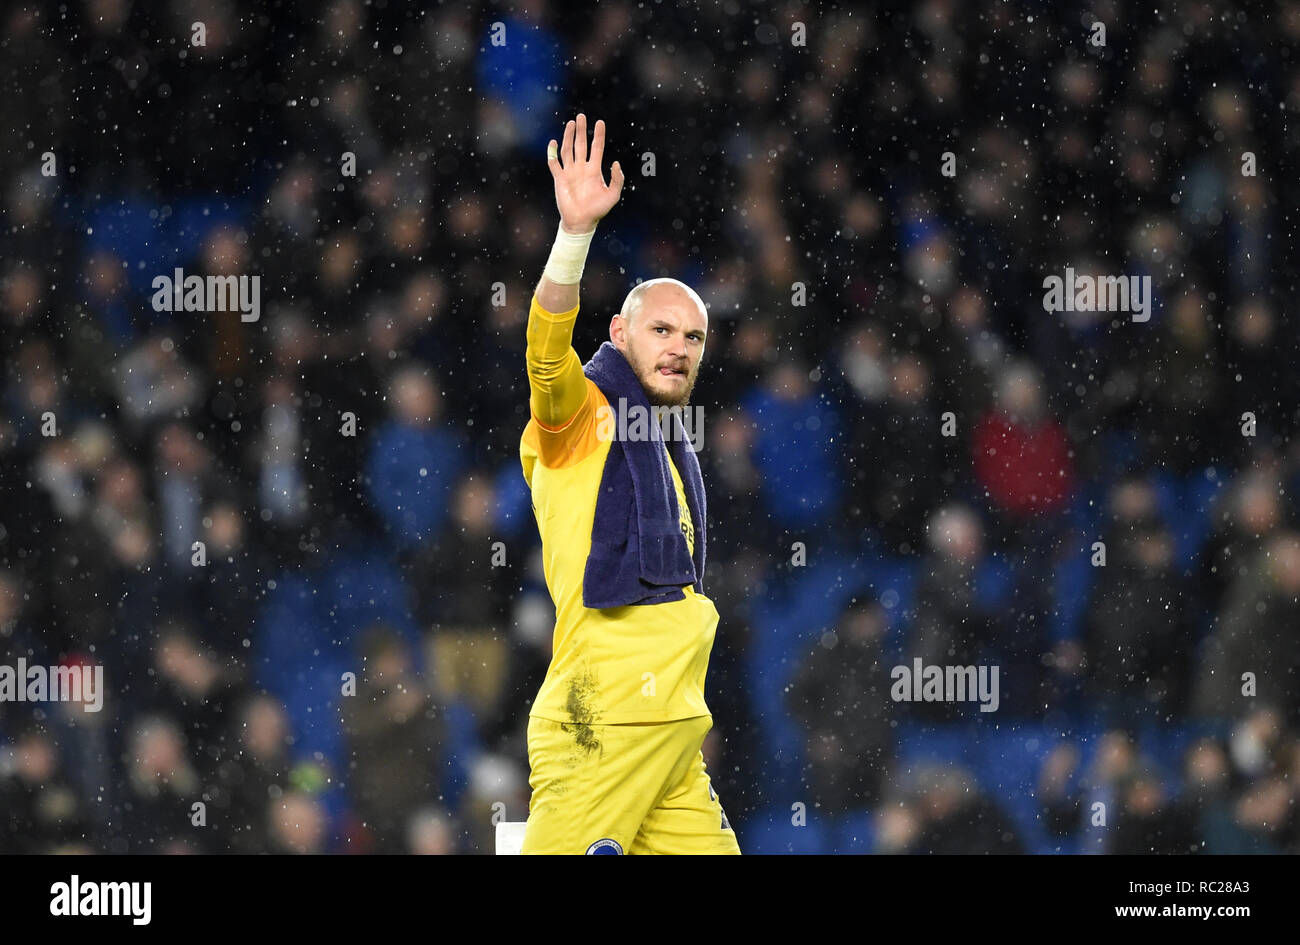 David Button of Brighton waves to the fans at the final whistle during the Premier League match between  Brighton & Hove Albion and Liverpool at the American Express Community Stadium . 12 January 2019 Editorial use only. No merchandising. For Football images FA and Premier League restrictions apply inc. no internet/mobile usage without FAPL license - for details contact Football Dataco Stock Photo